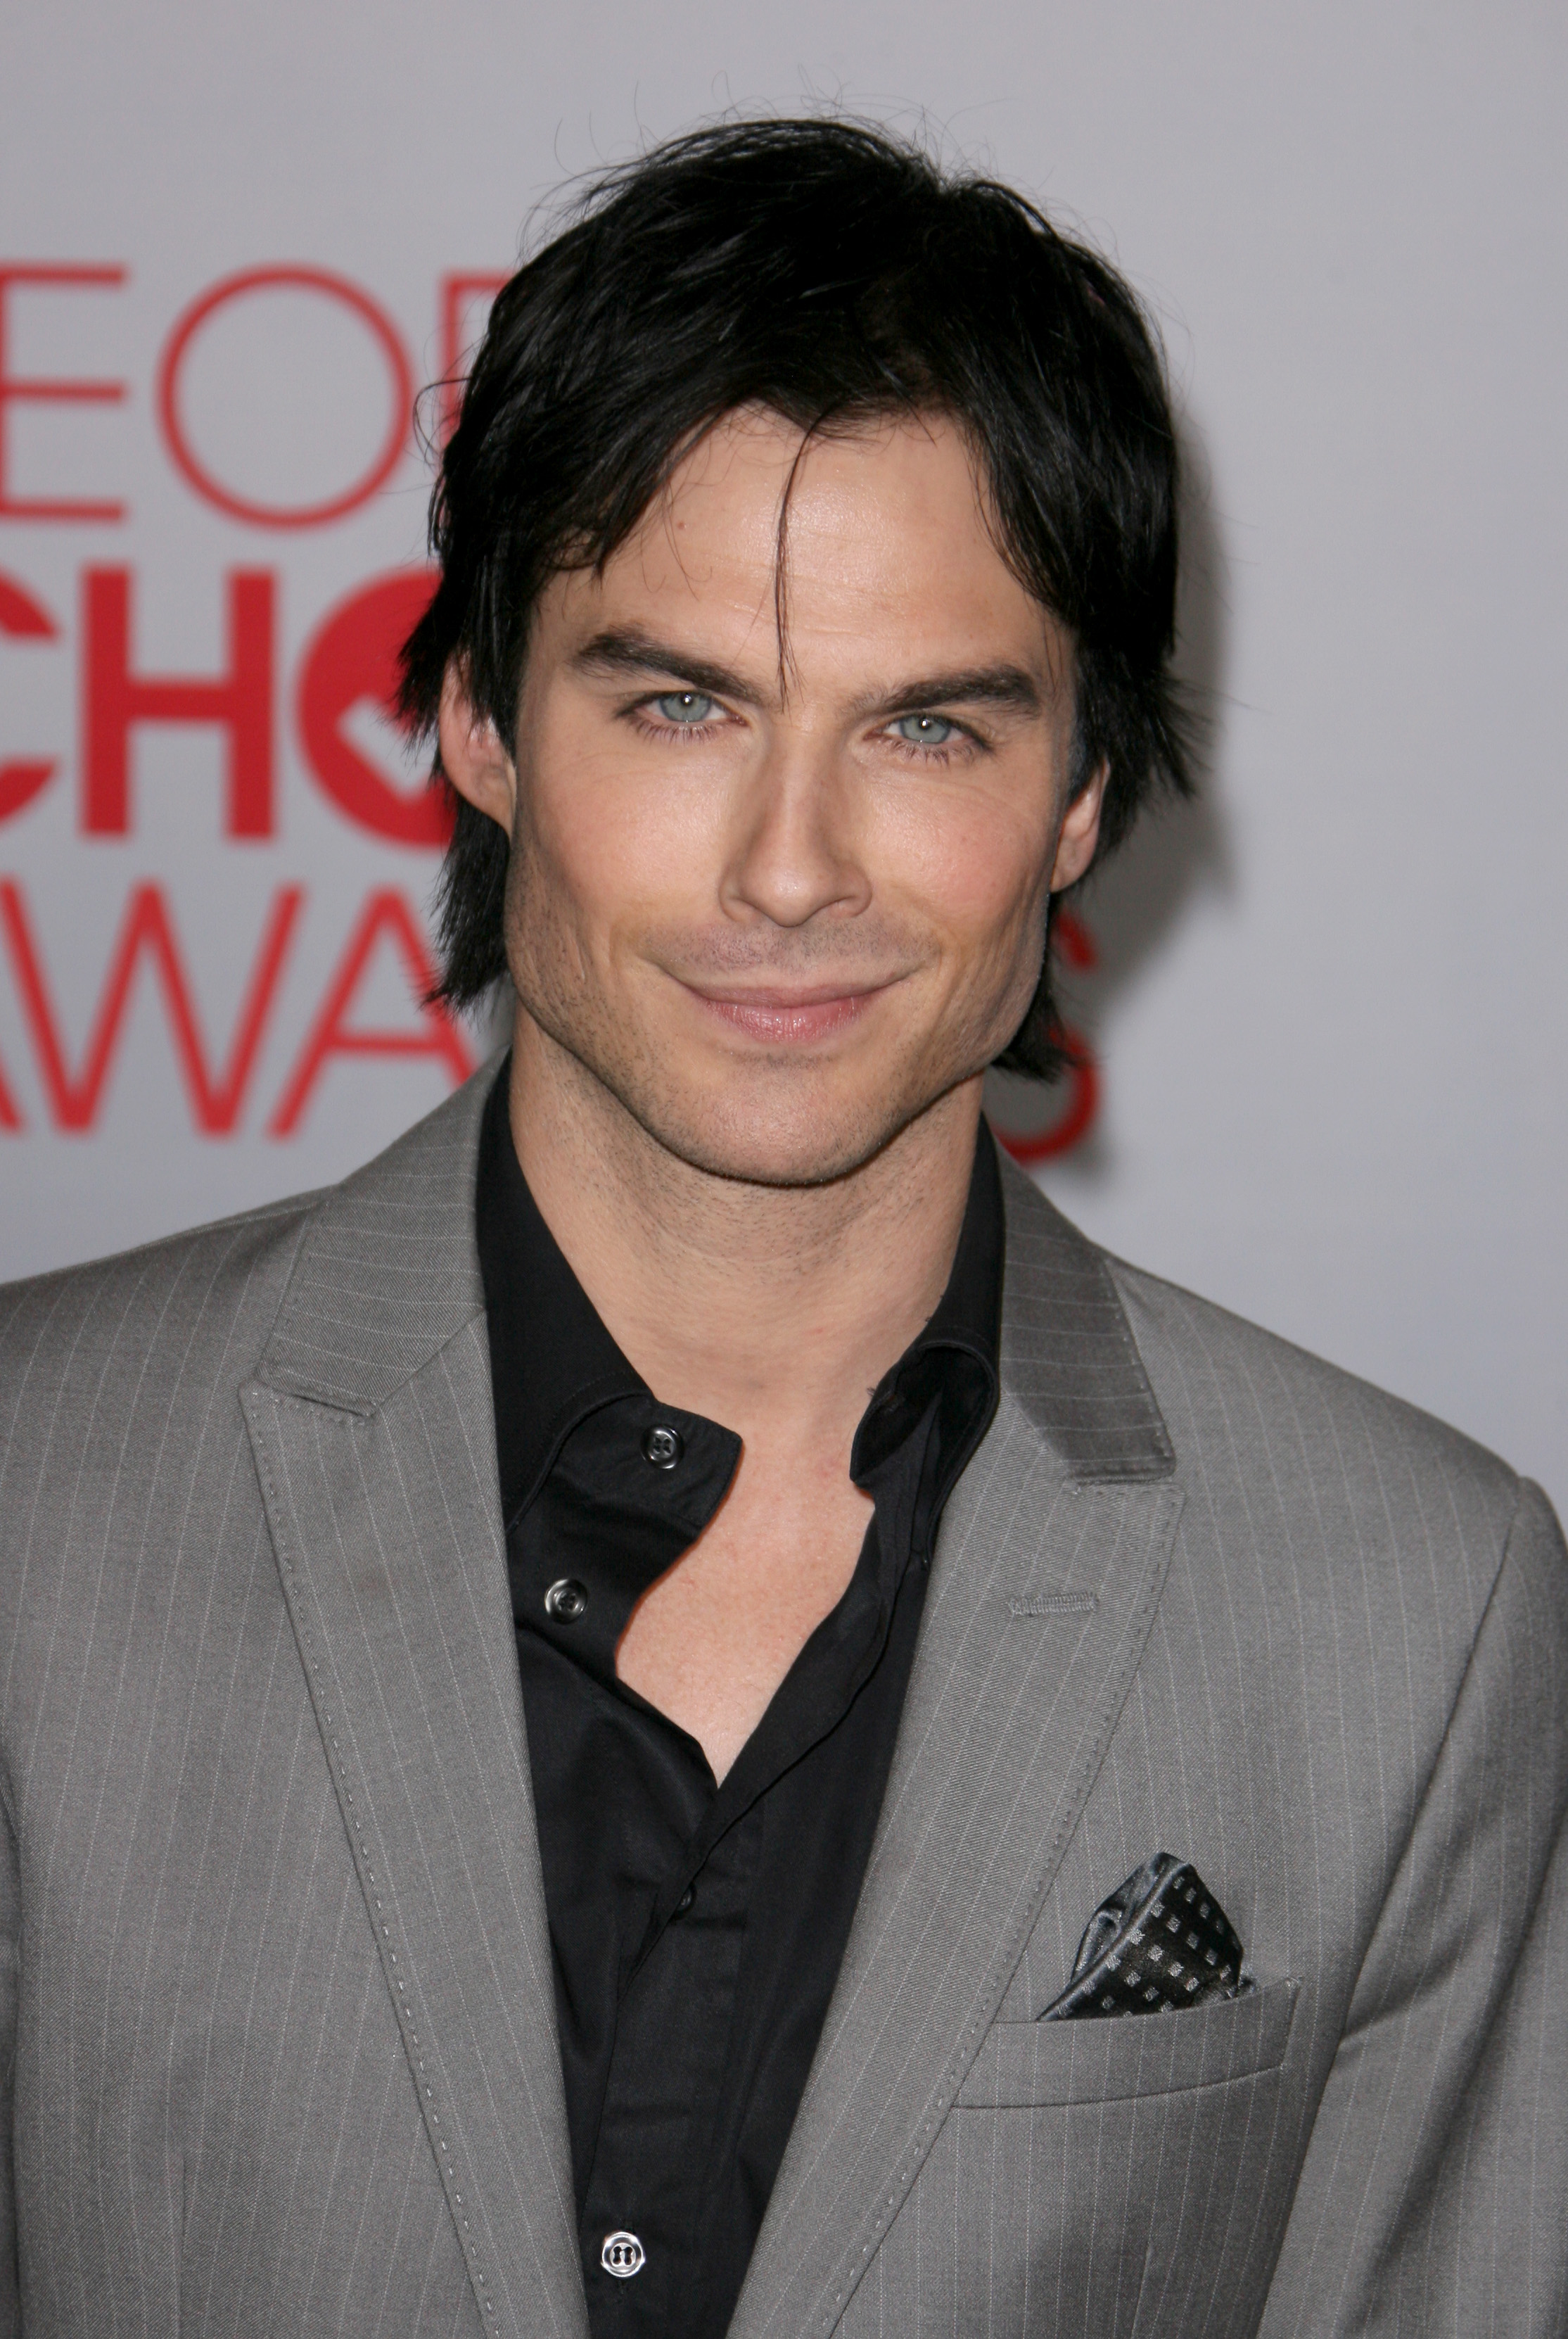 Ian Somerhalder's Transformation Over the Years: Photos